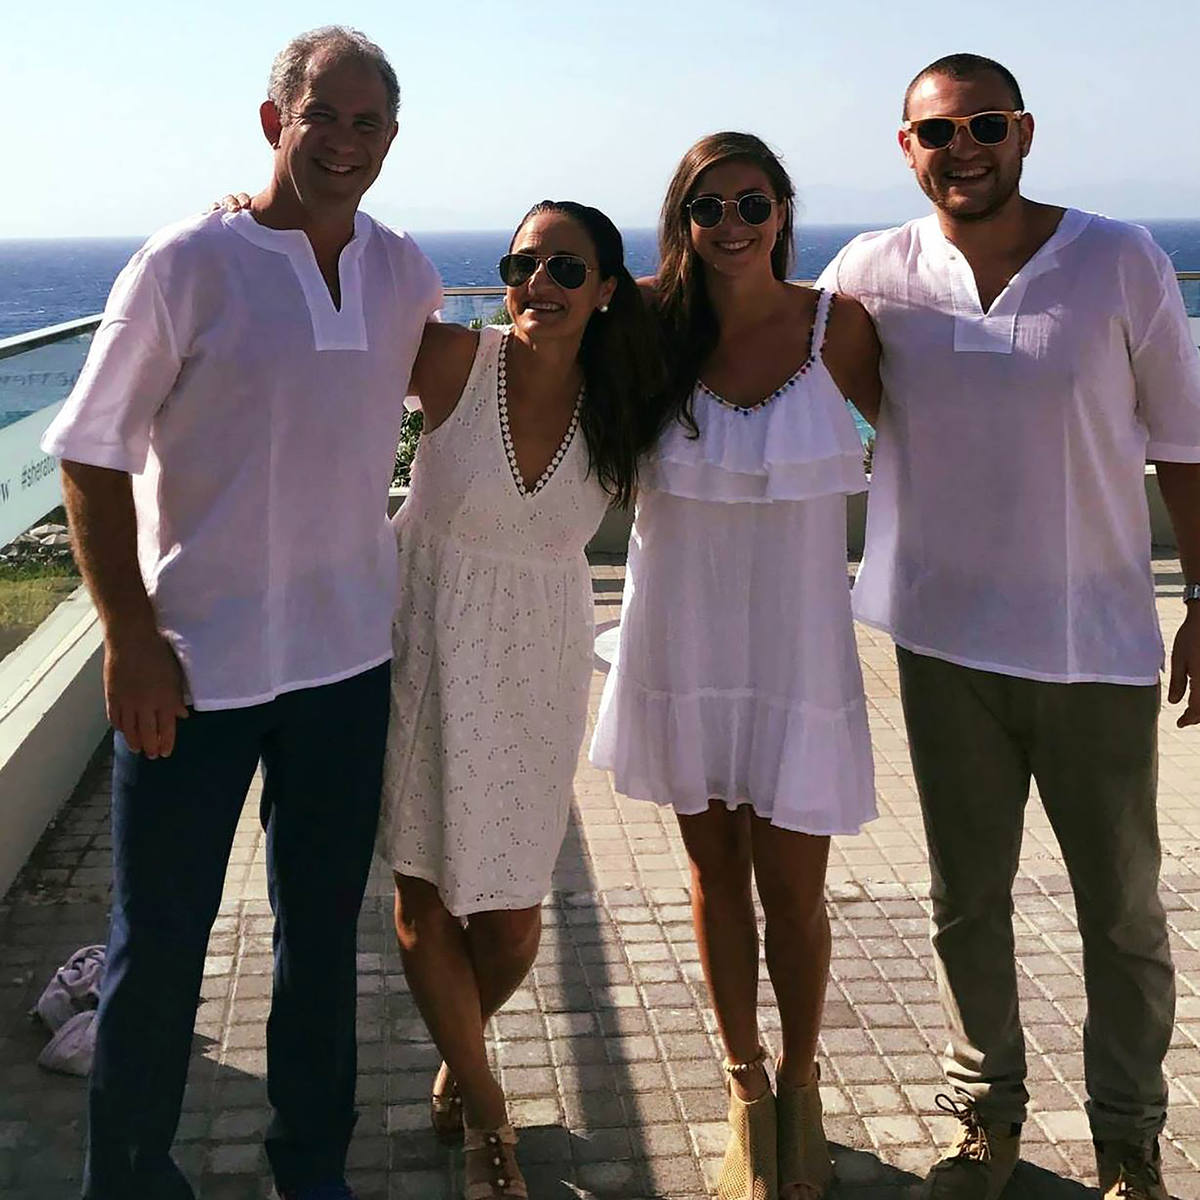 The Markowitz family in Rhodes, Greece. 2017.